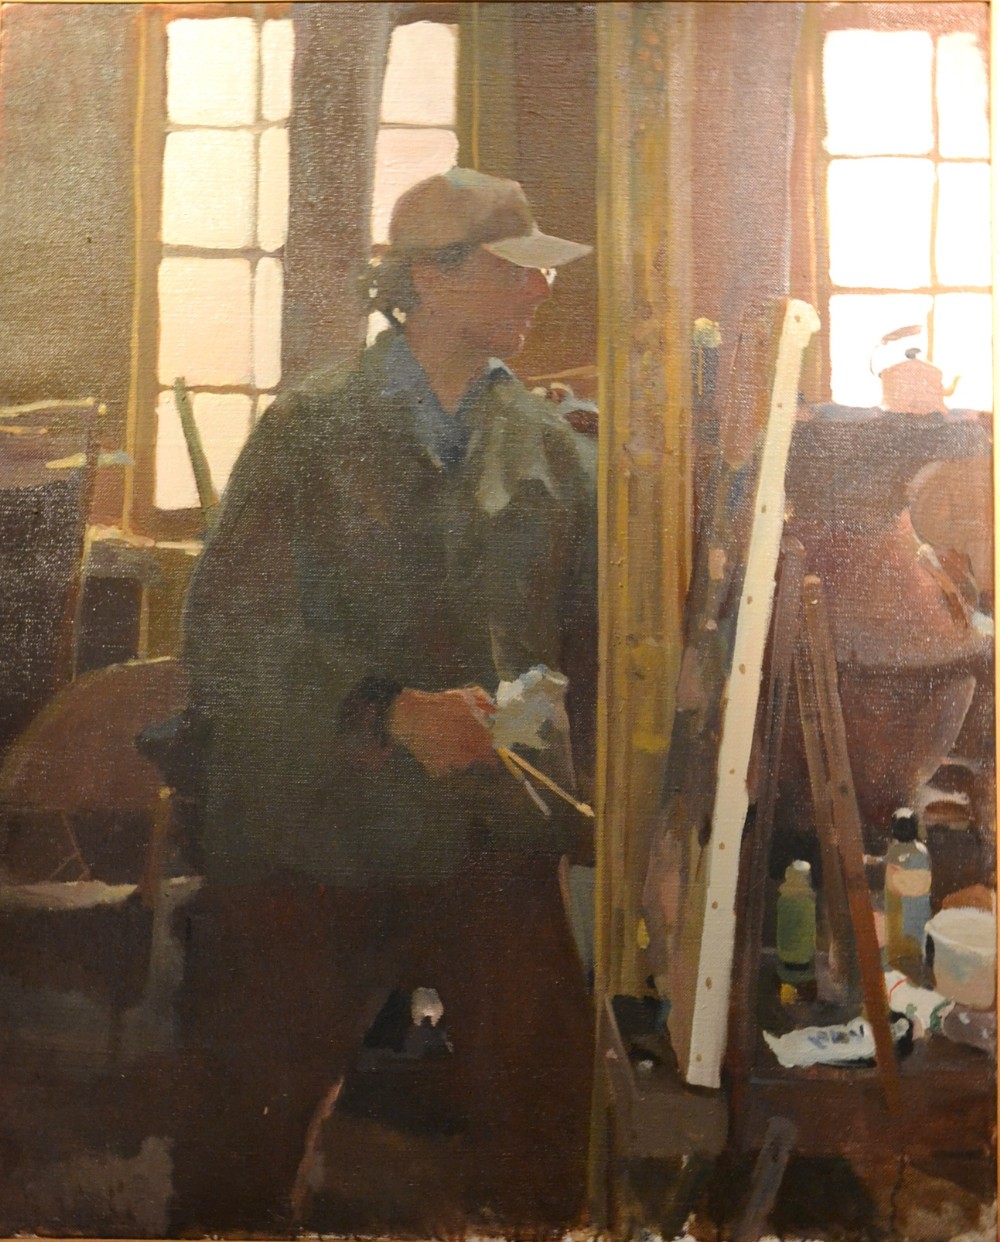 Charles Reid (later 20th century) American
'At Work'
Oil on canvas, 107cm by 86.5cm 

Provenance: